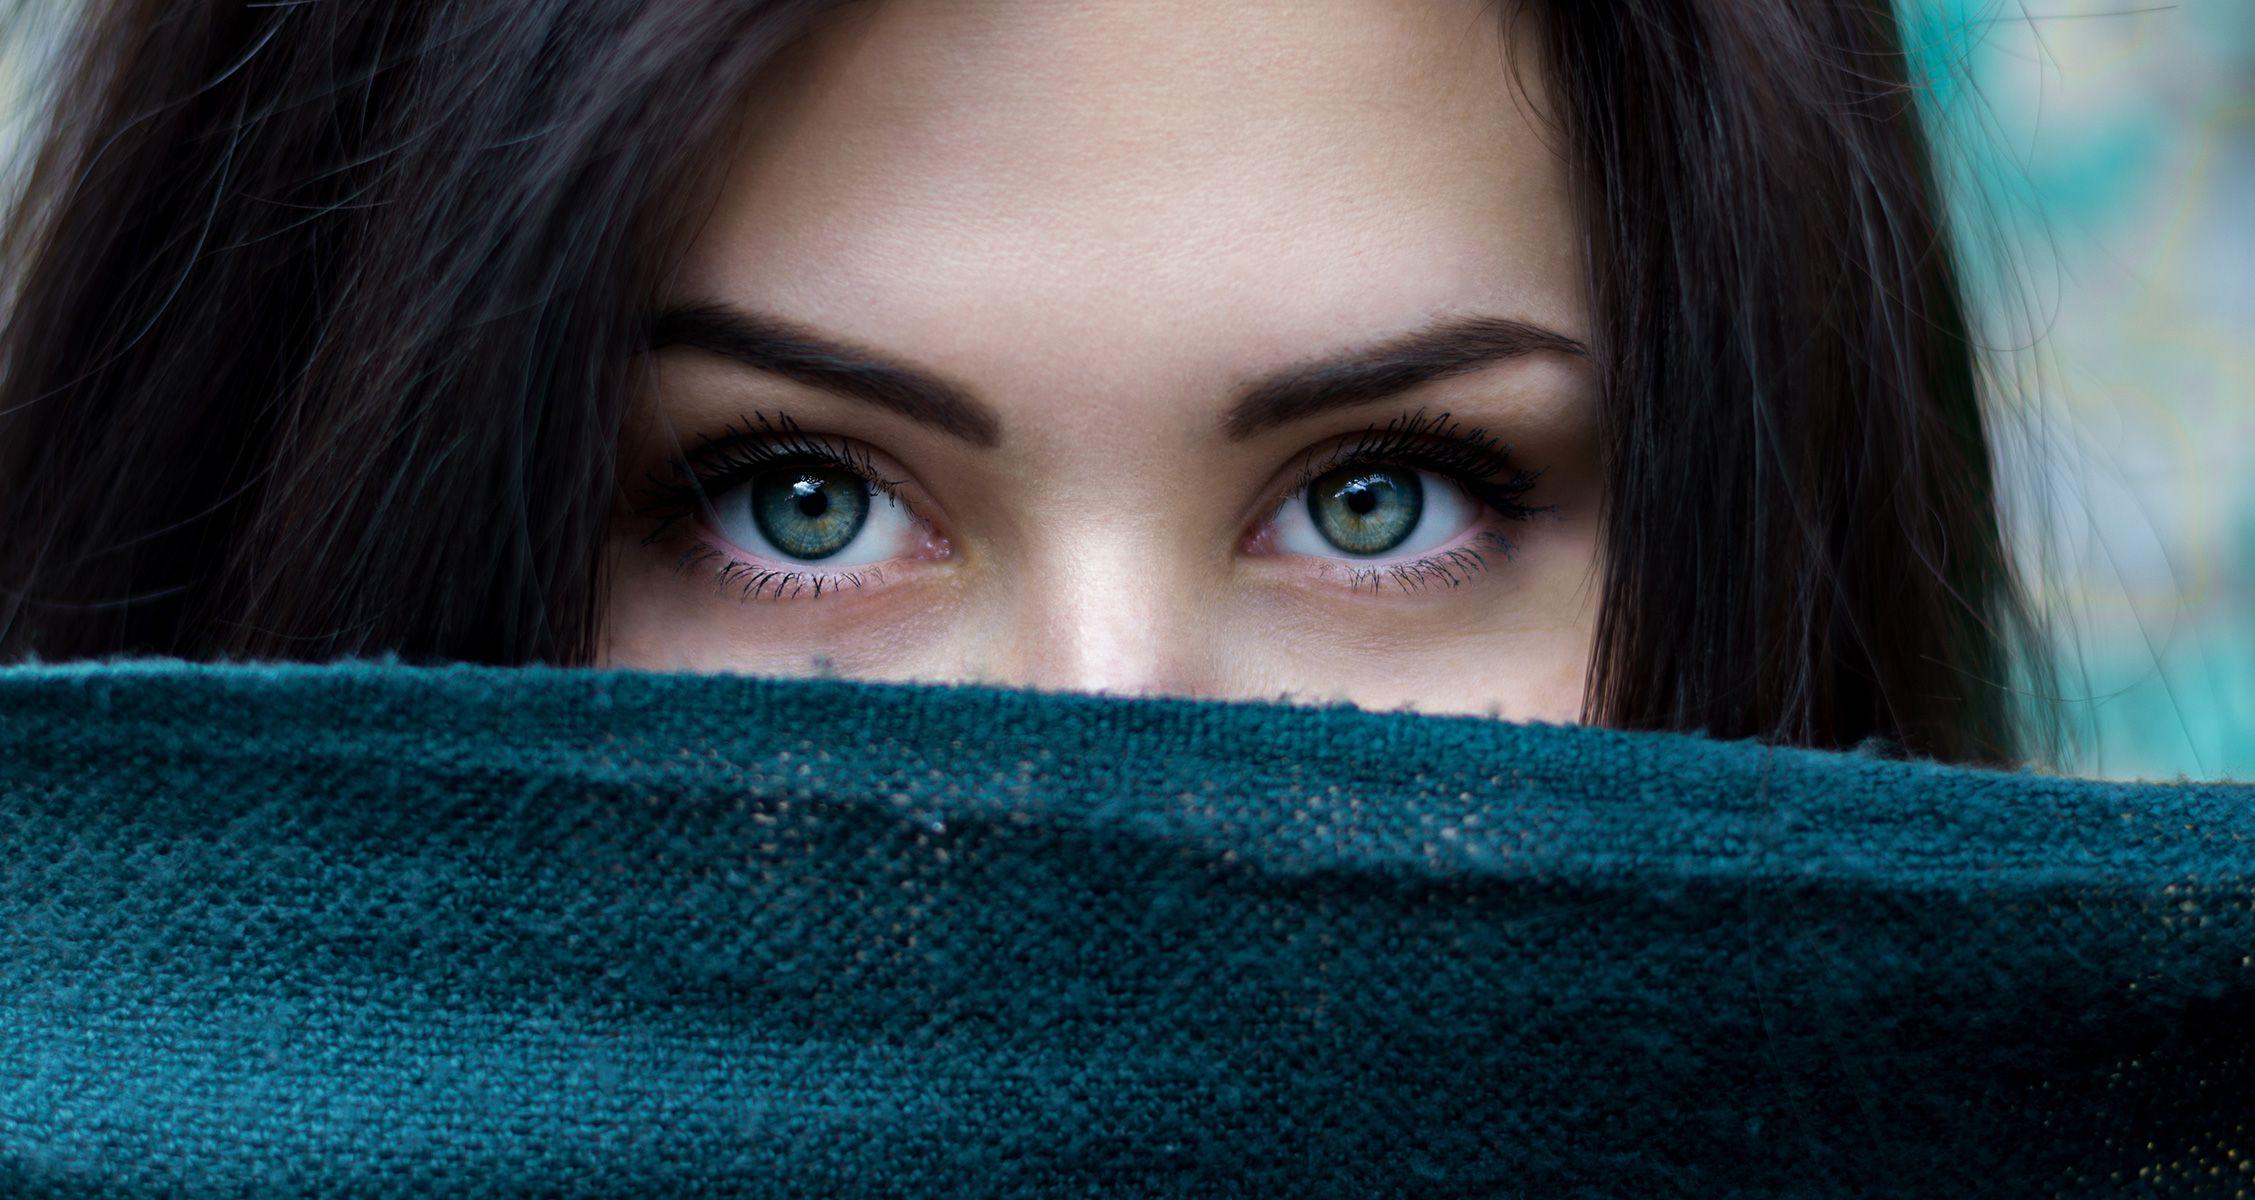 Black and Green Eye Logo - Black Haired Girl with Green eyes